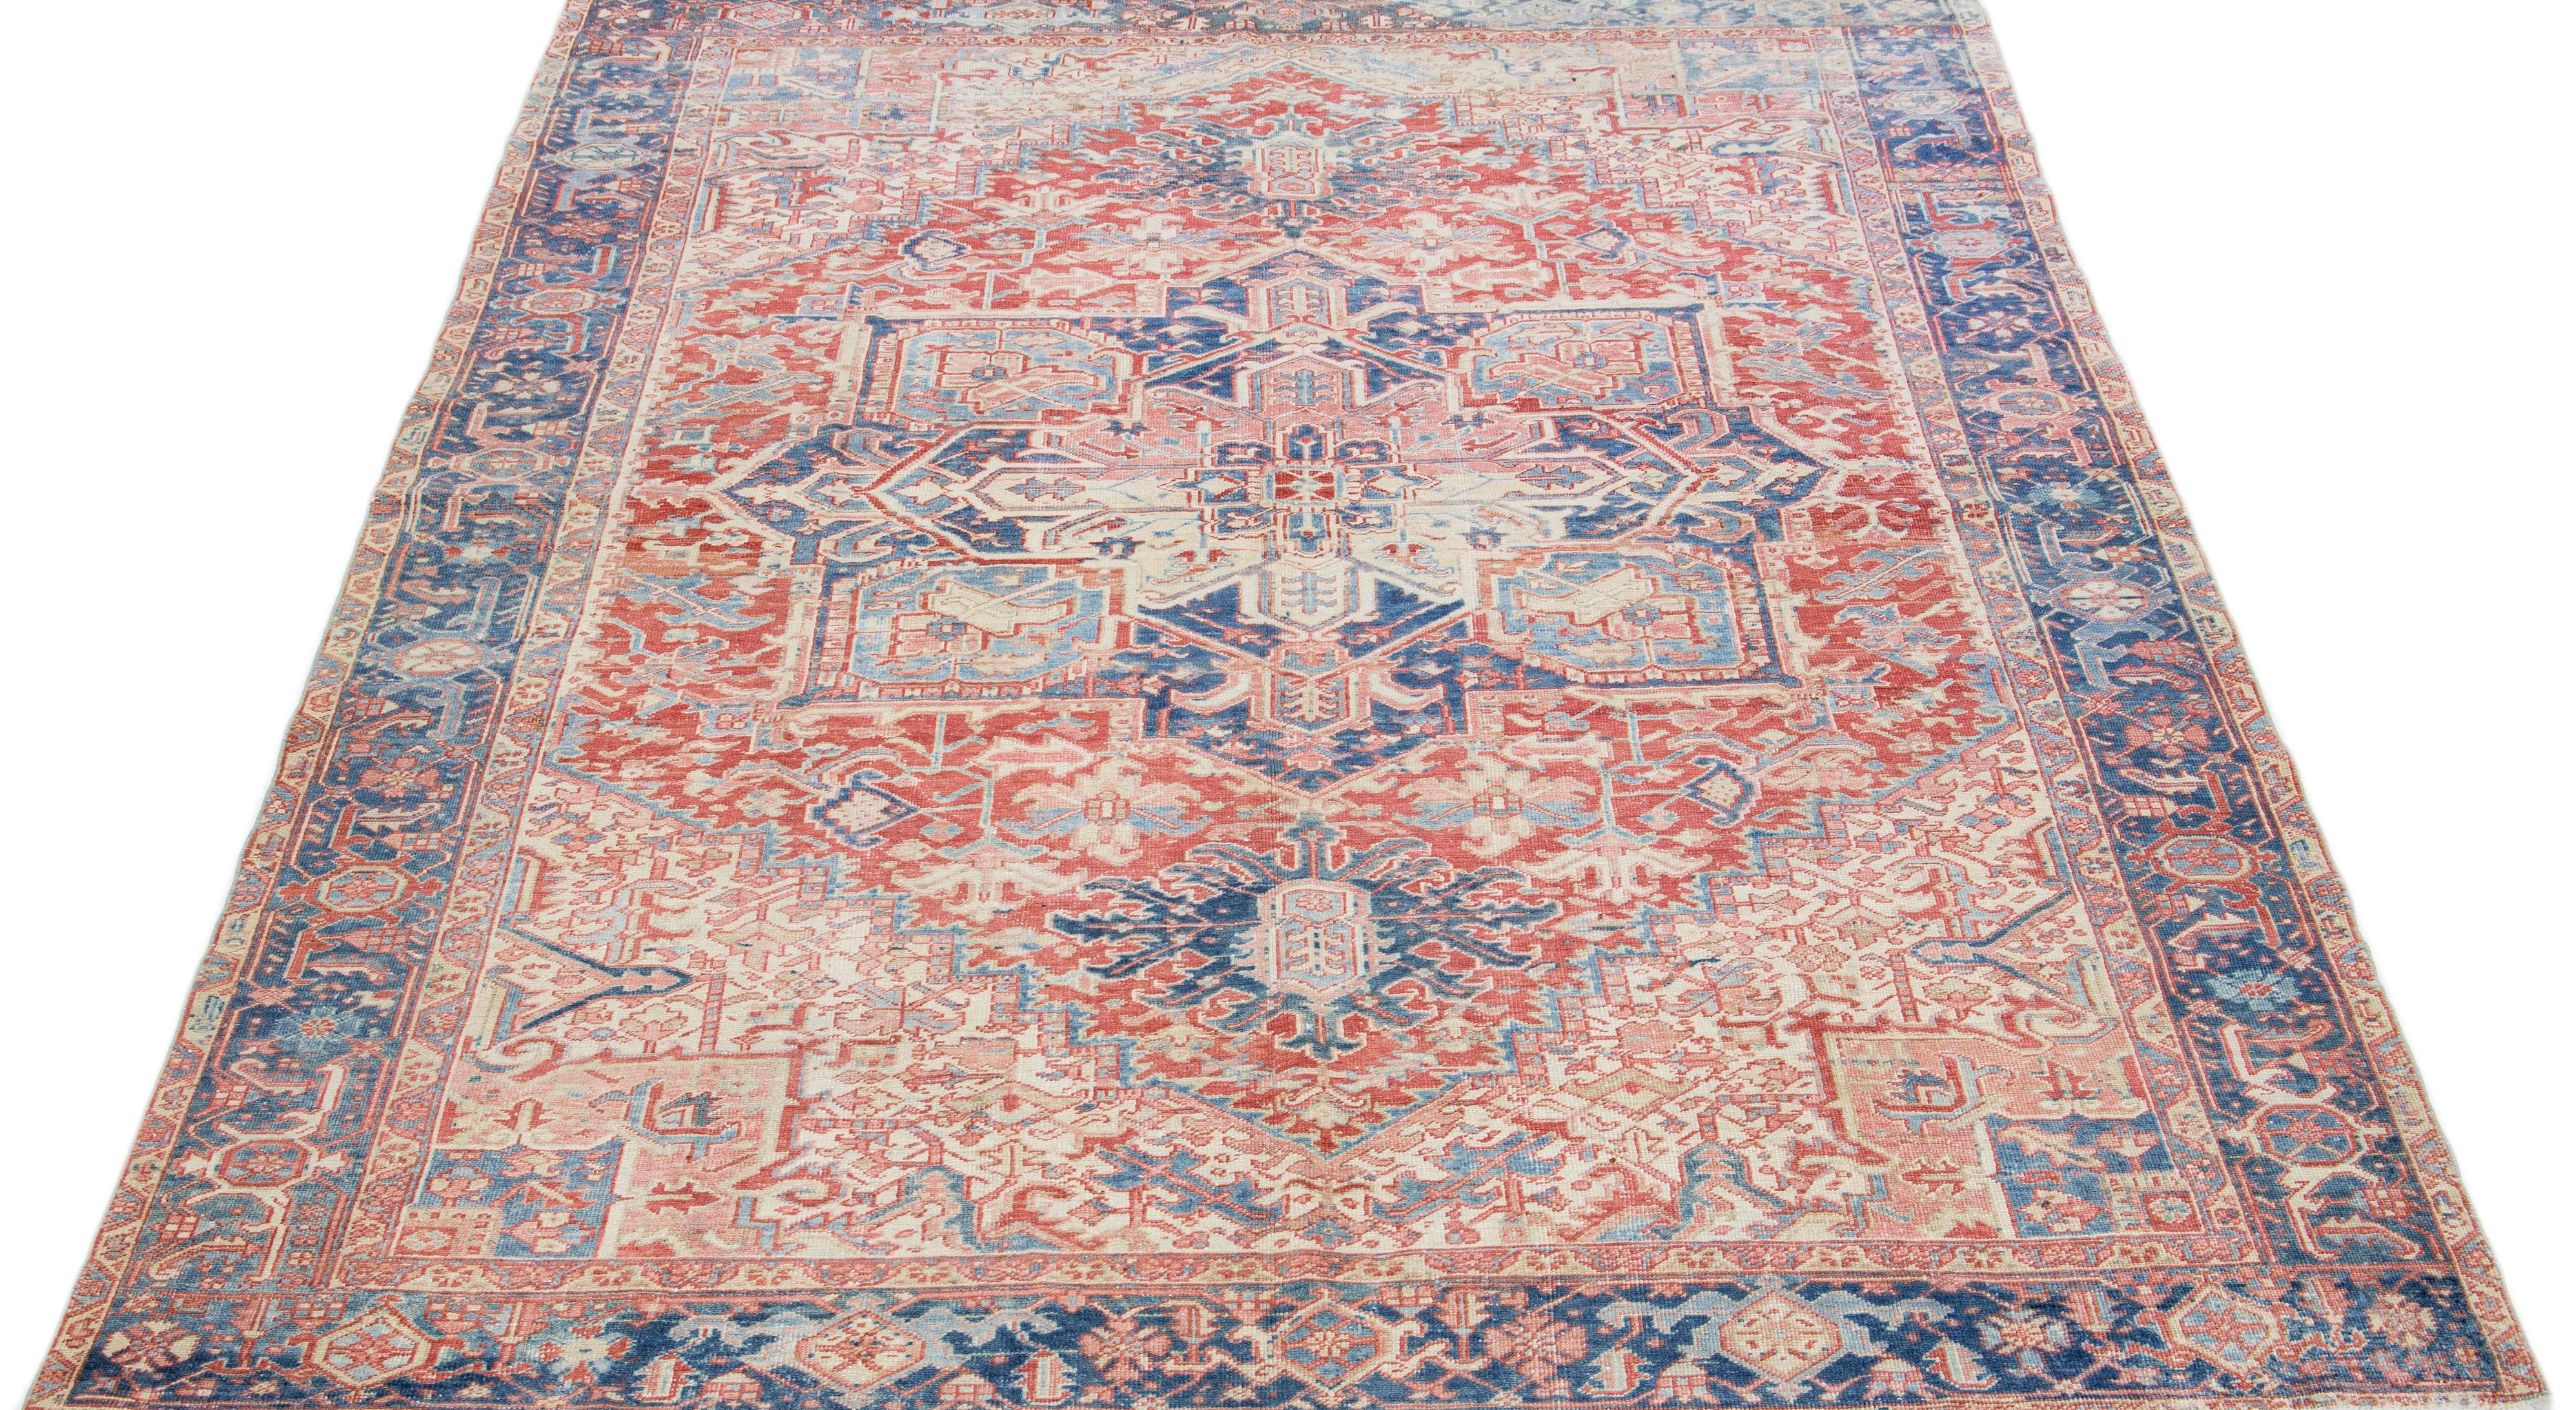 Beautiful antique Heriz hand-knotted wool rug with a peach color field. This Persian rug has a blue frame and rust accents in a gorgeous all-over geometric floral design.

This rug measures: 8'3